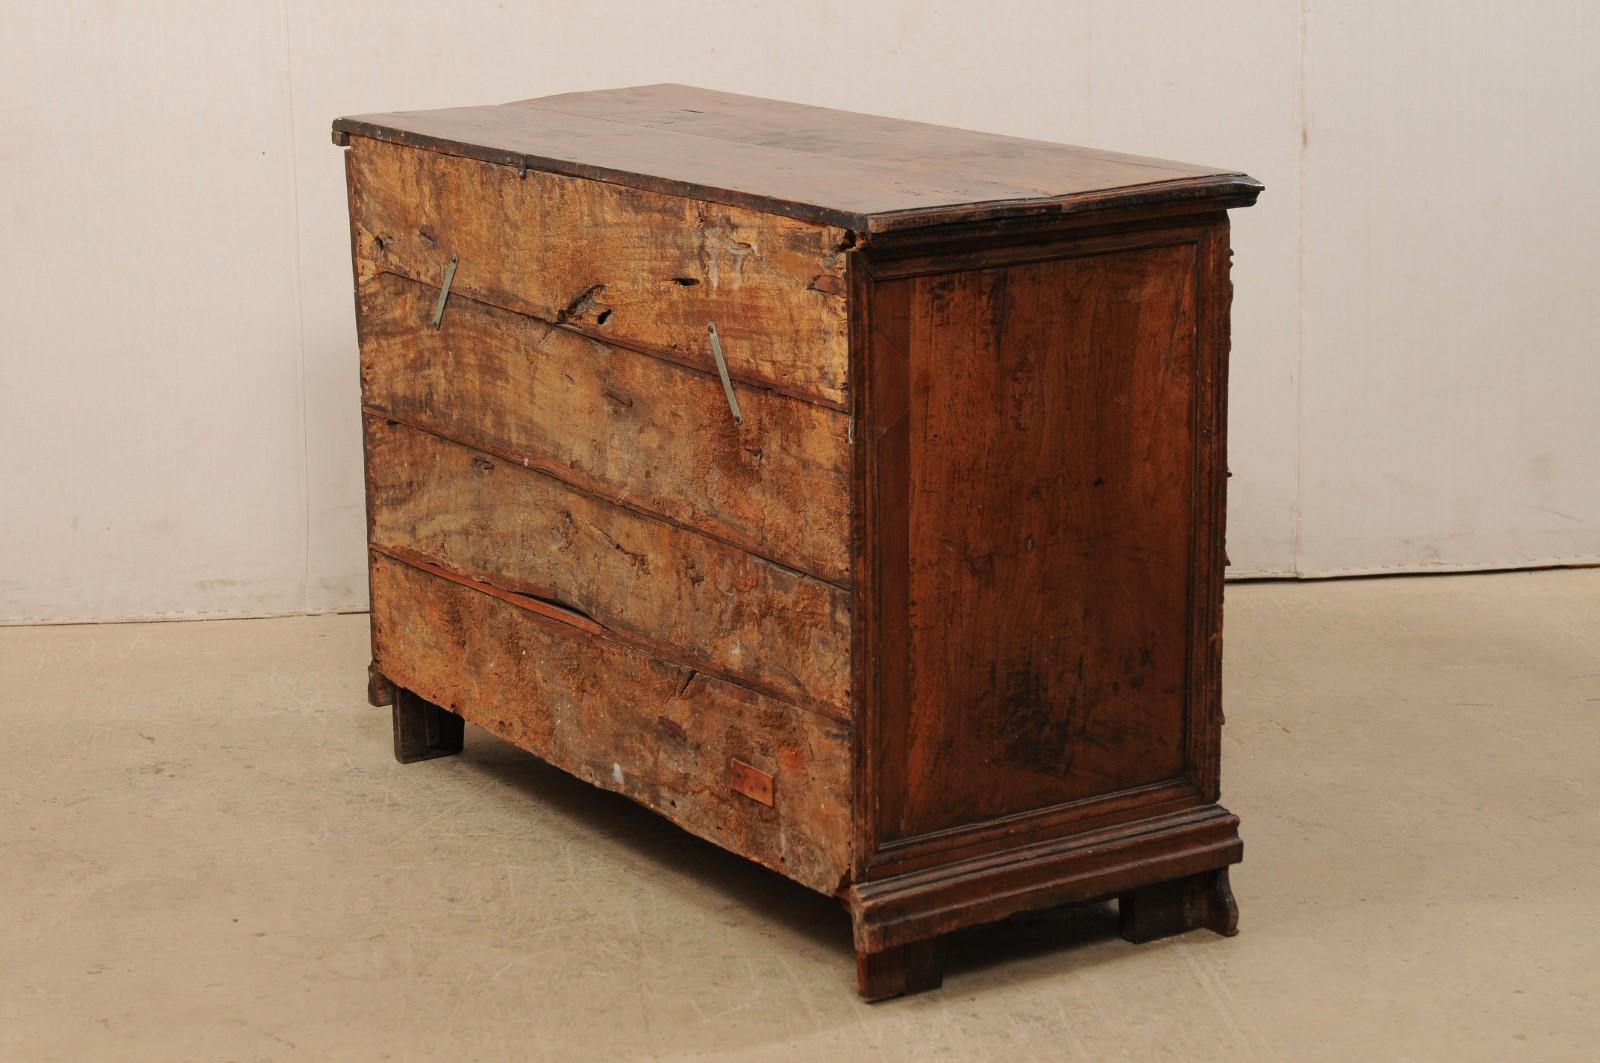 18th Century 4-Drawer Commode with Finely Carved Embellishments and Trimmings For Sale 6